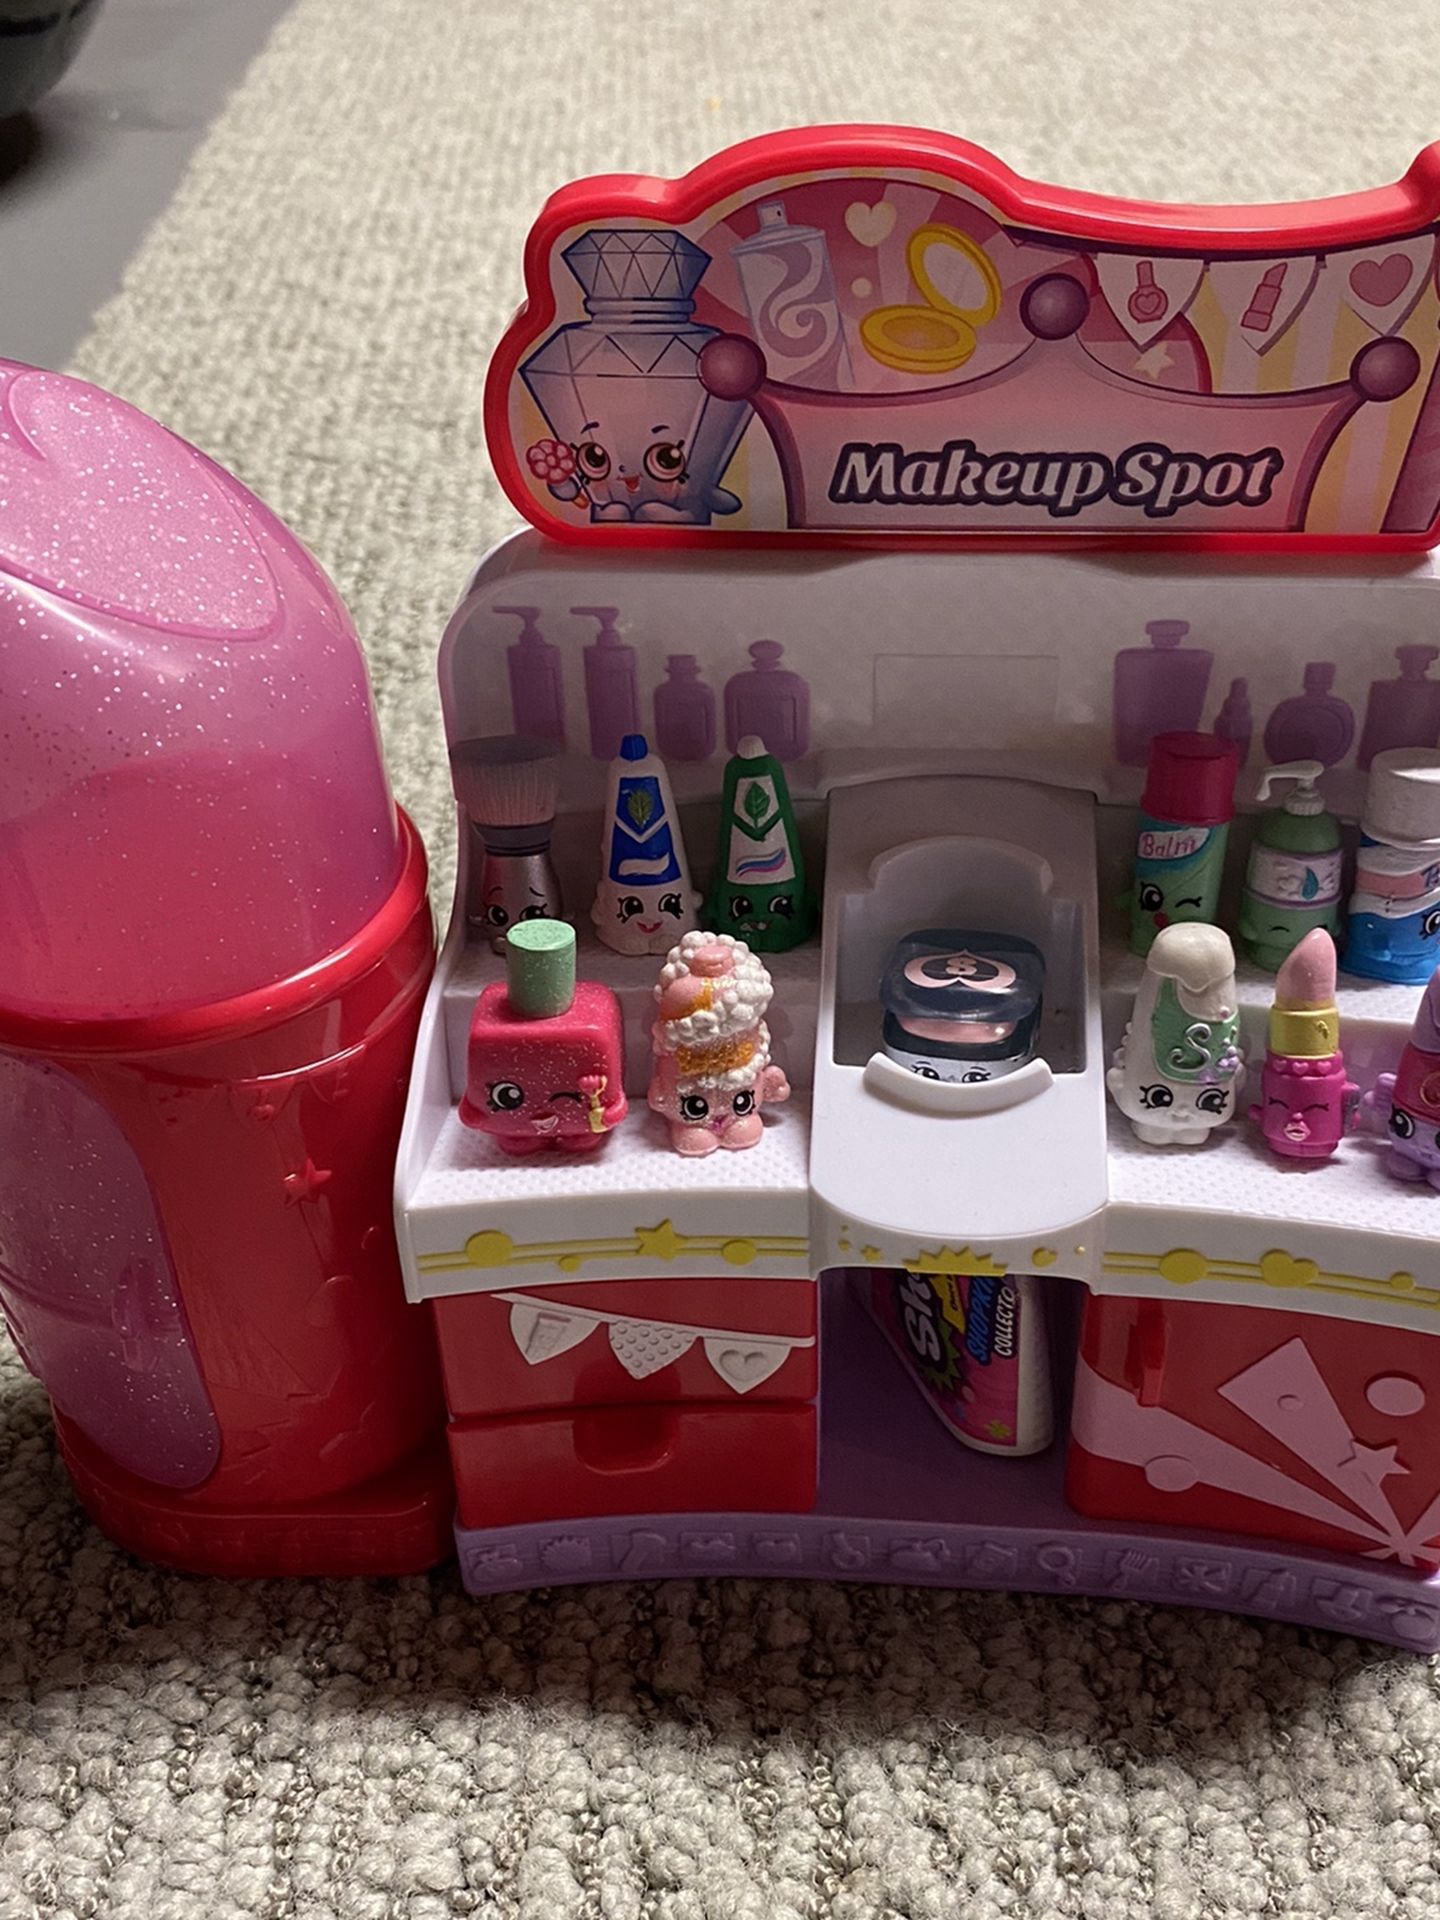 Shopkins Beauty Collection